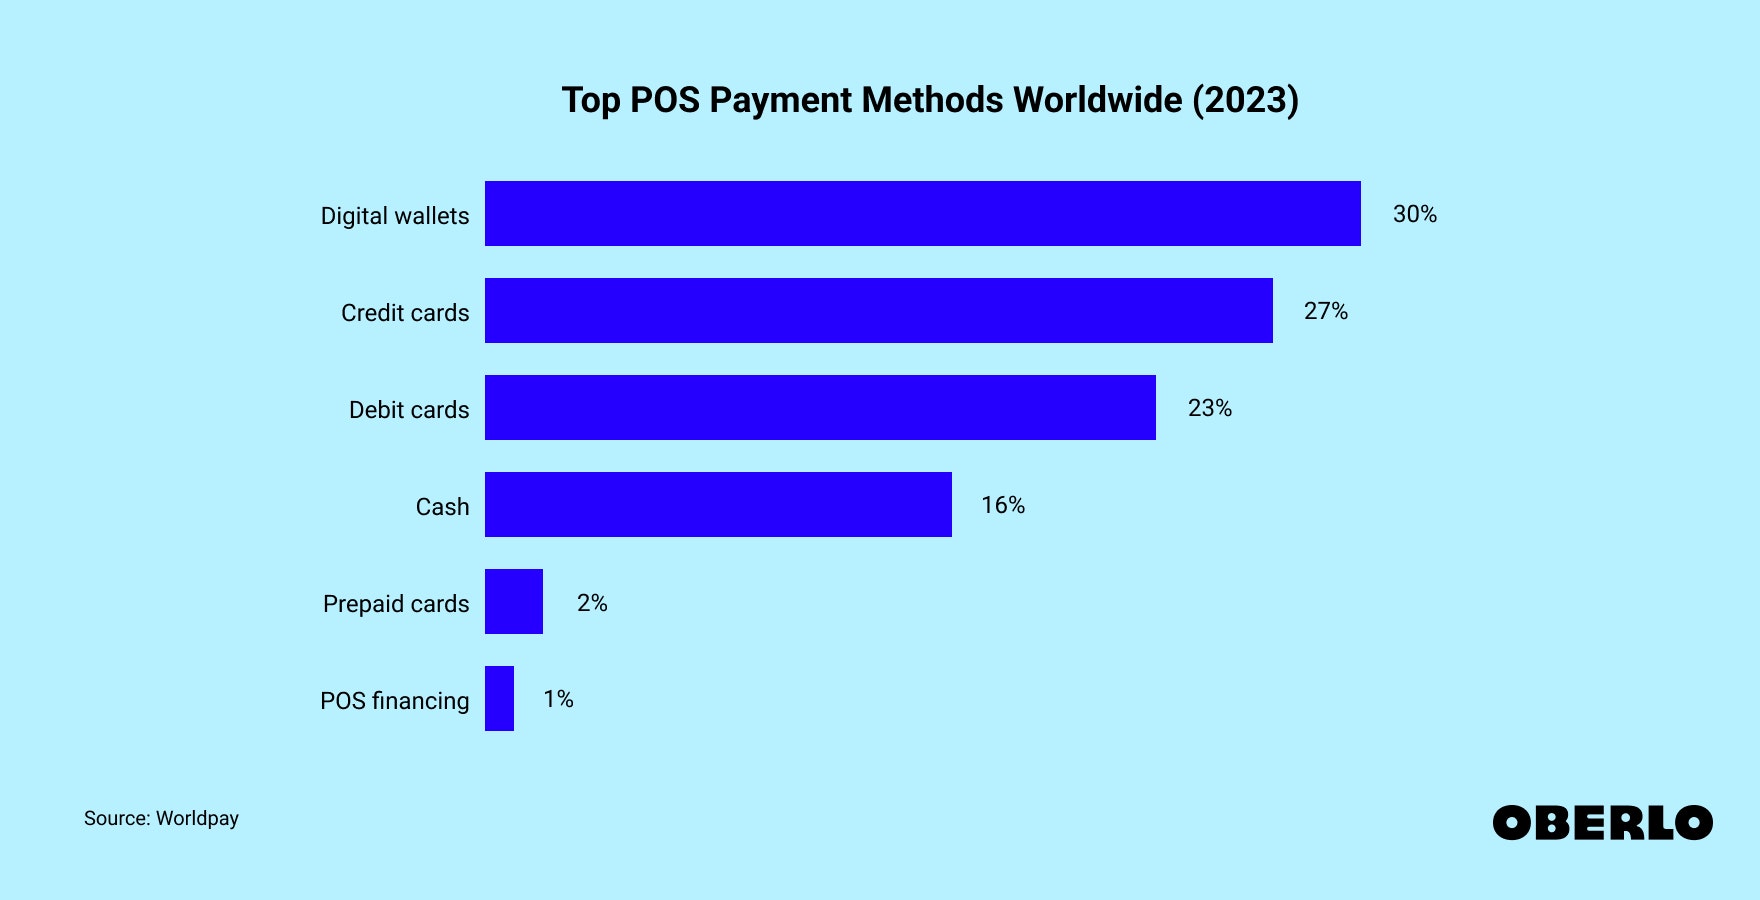 Chart showing: Top POS Payment Methods Worldwide in 2023